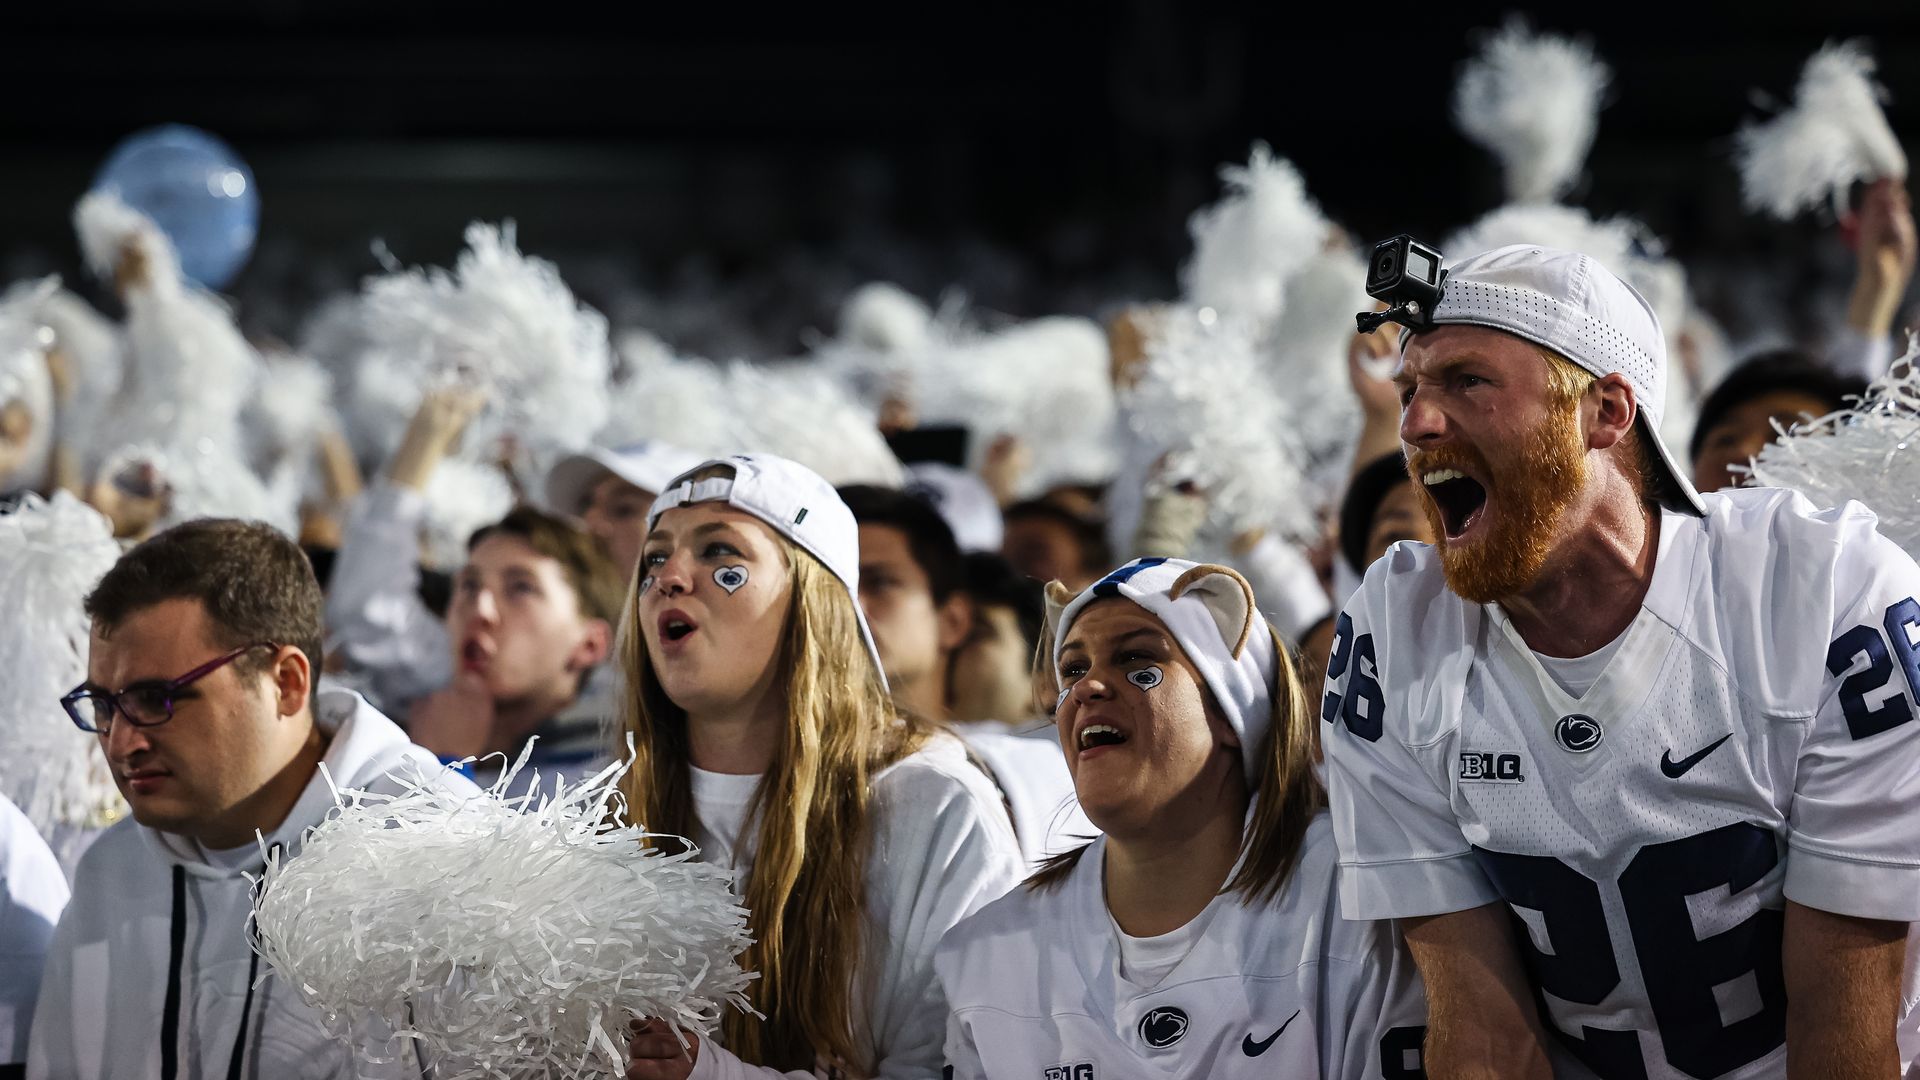 The "White Out" crowd at last year's football game between Penn State and Minnesota.